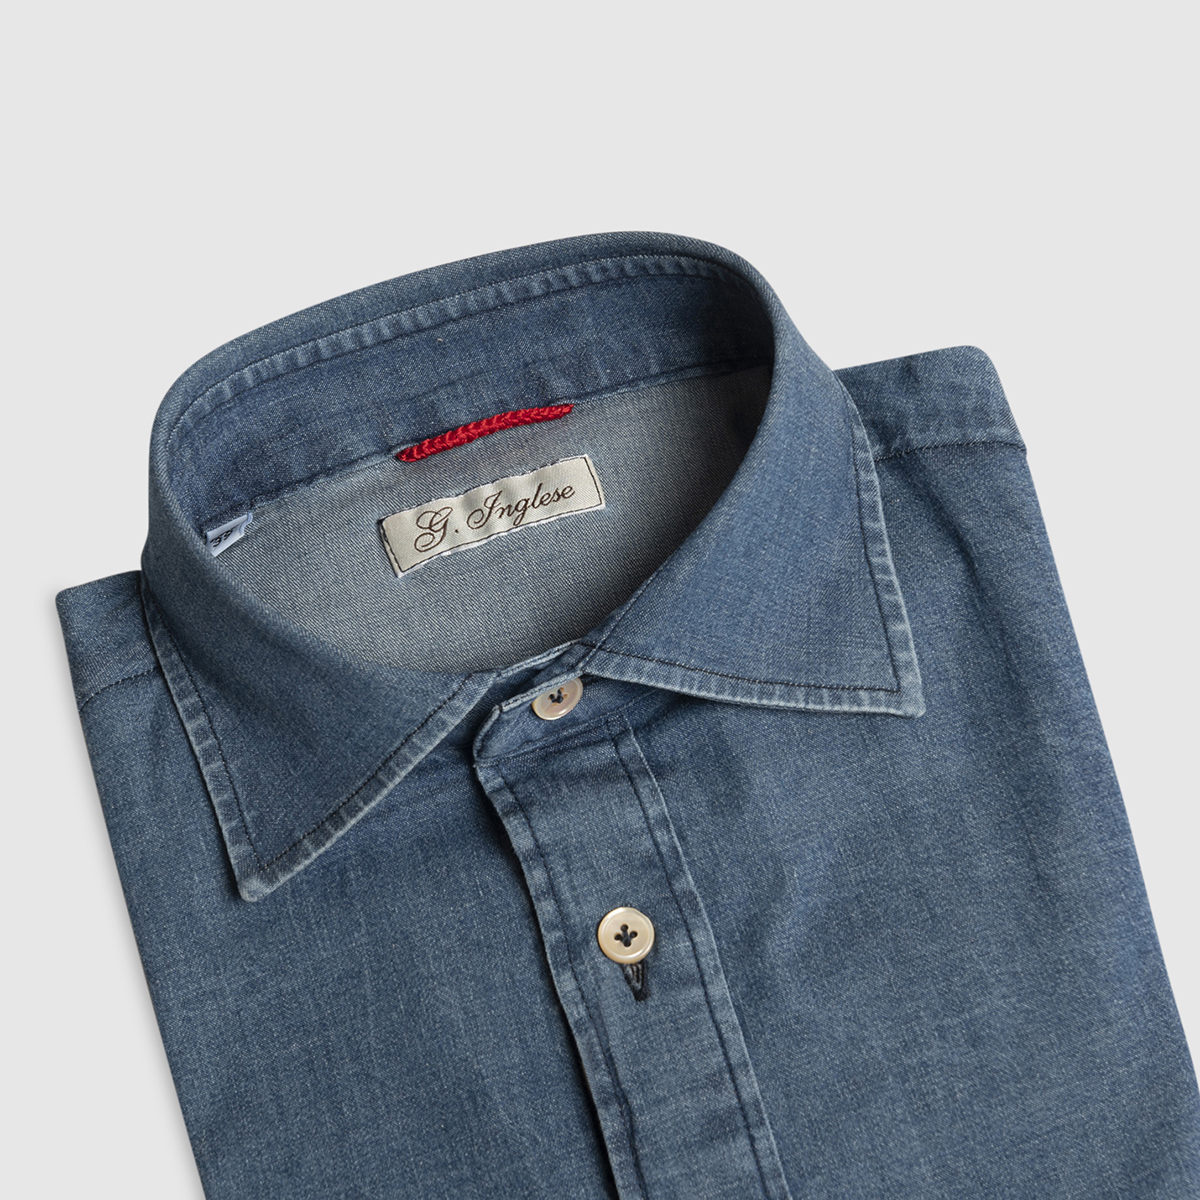 G.Inglese JFK  Polo in Denim Japan Washed G. Inglese on sale 2022 2